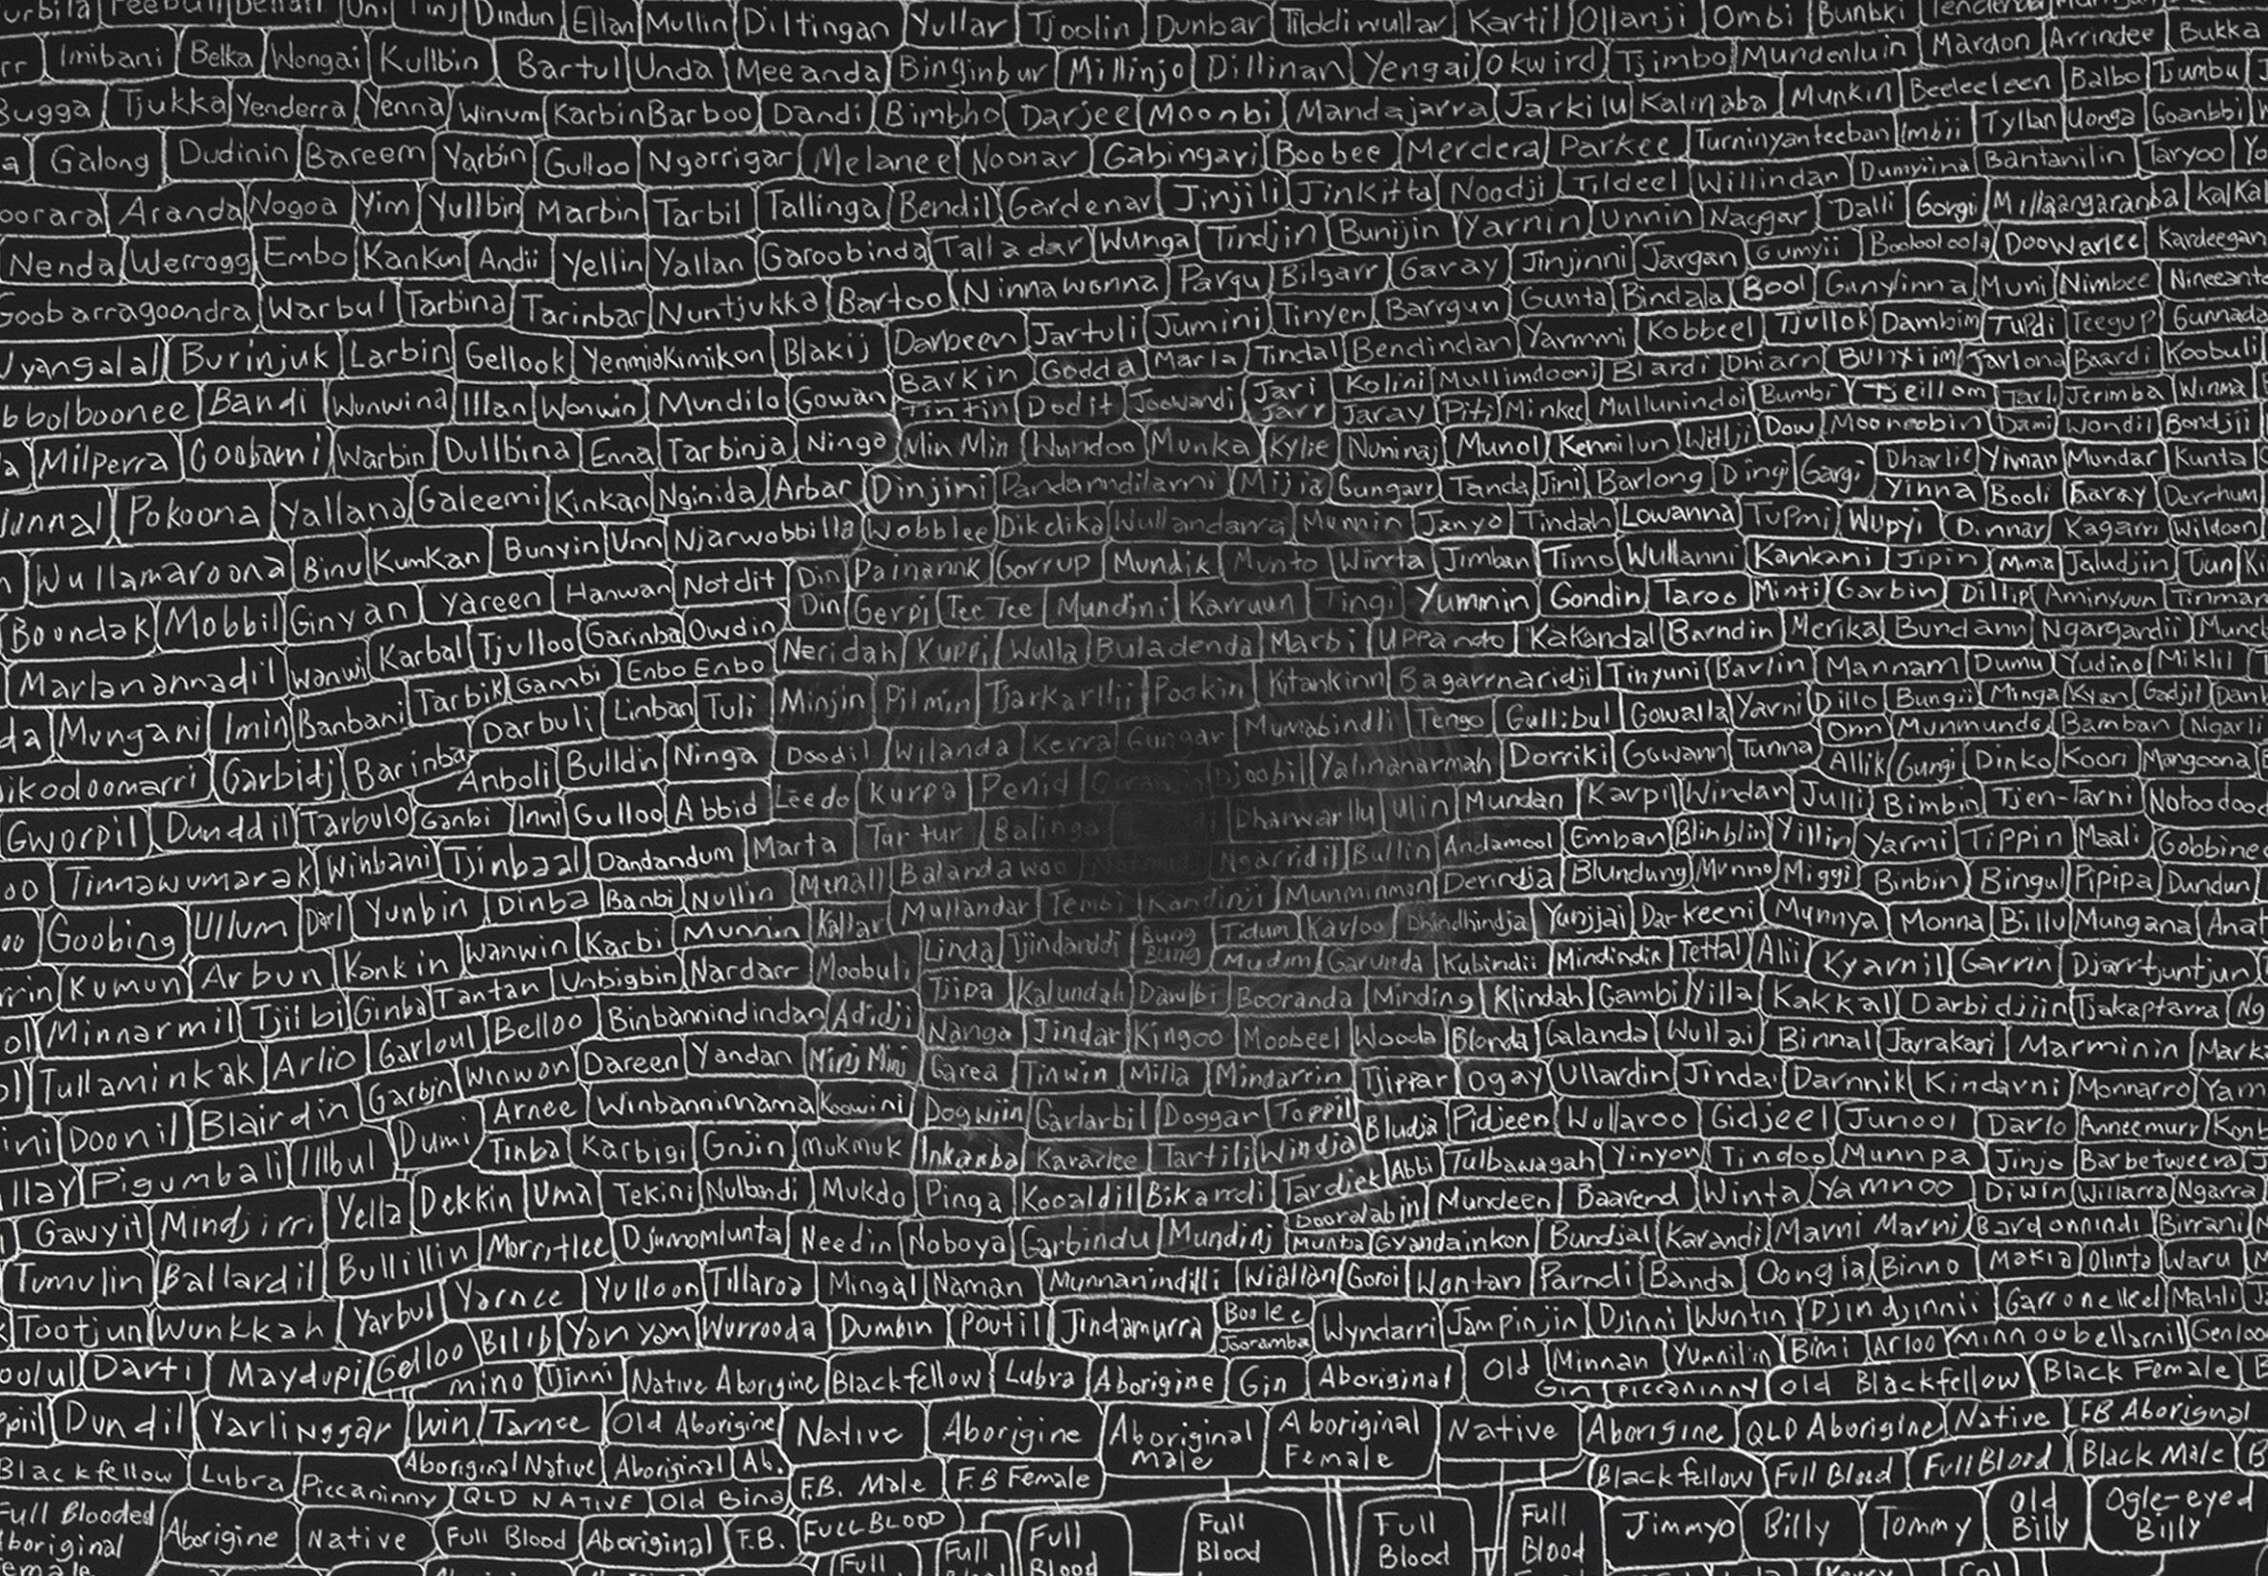 A section of the wall shows the boxes of the family tree blurring into a vortex.